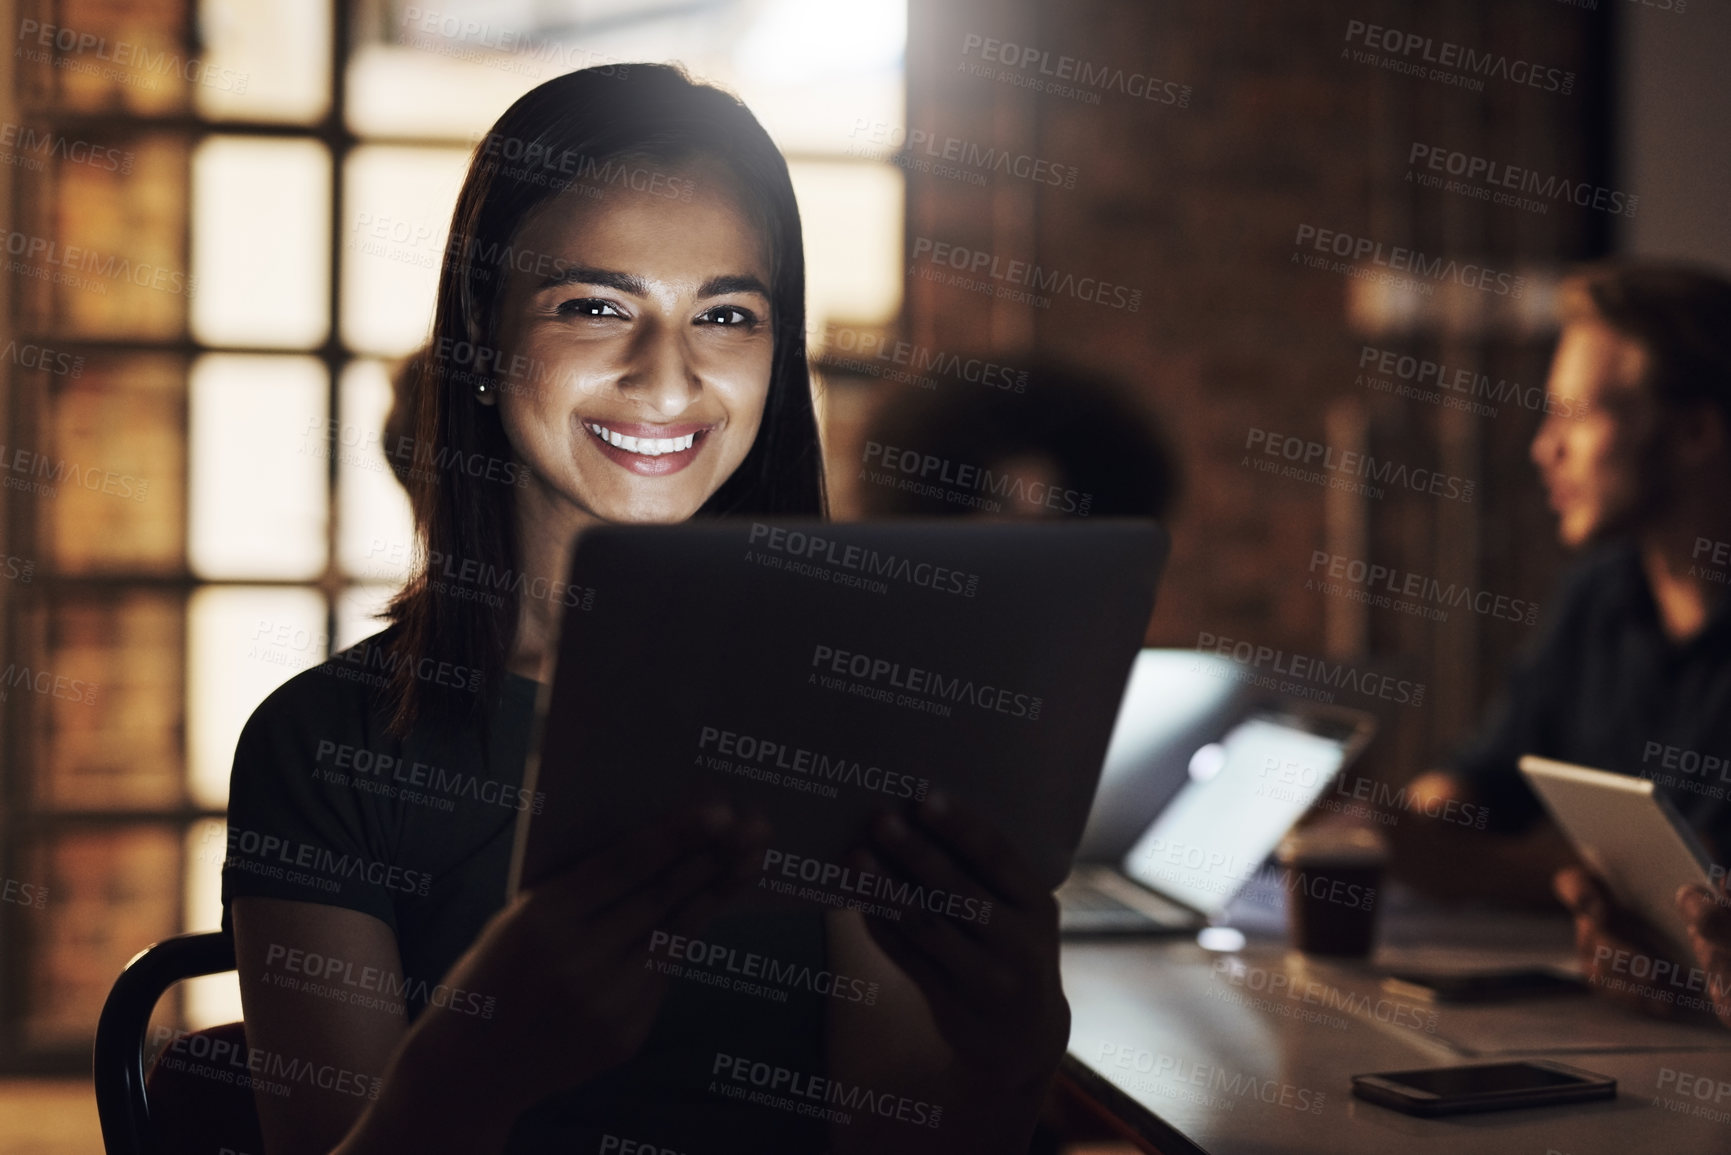 Buy stock photo Cropped portrait of an attractive young female designer sitting in the boardroom during a meeting